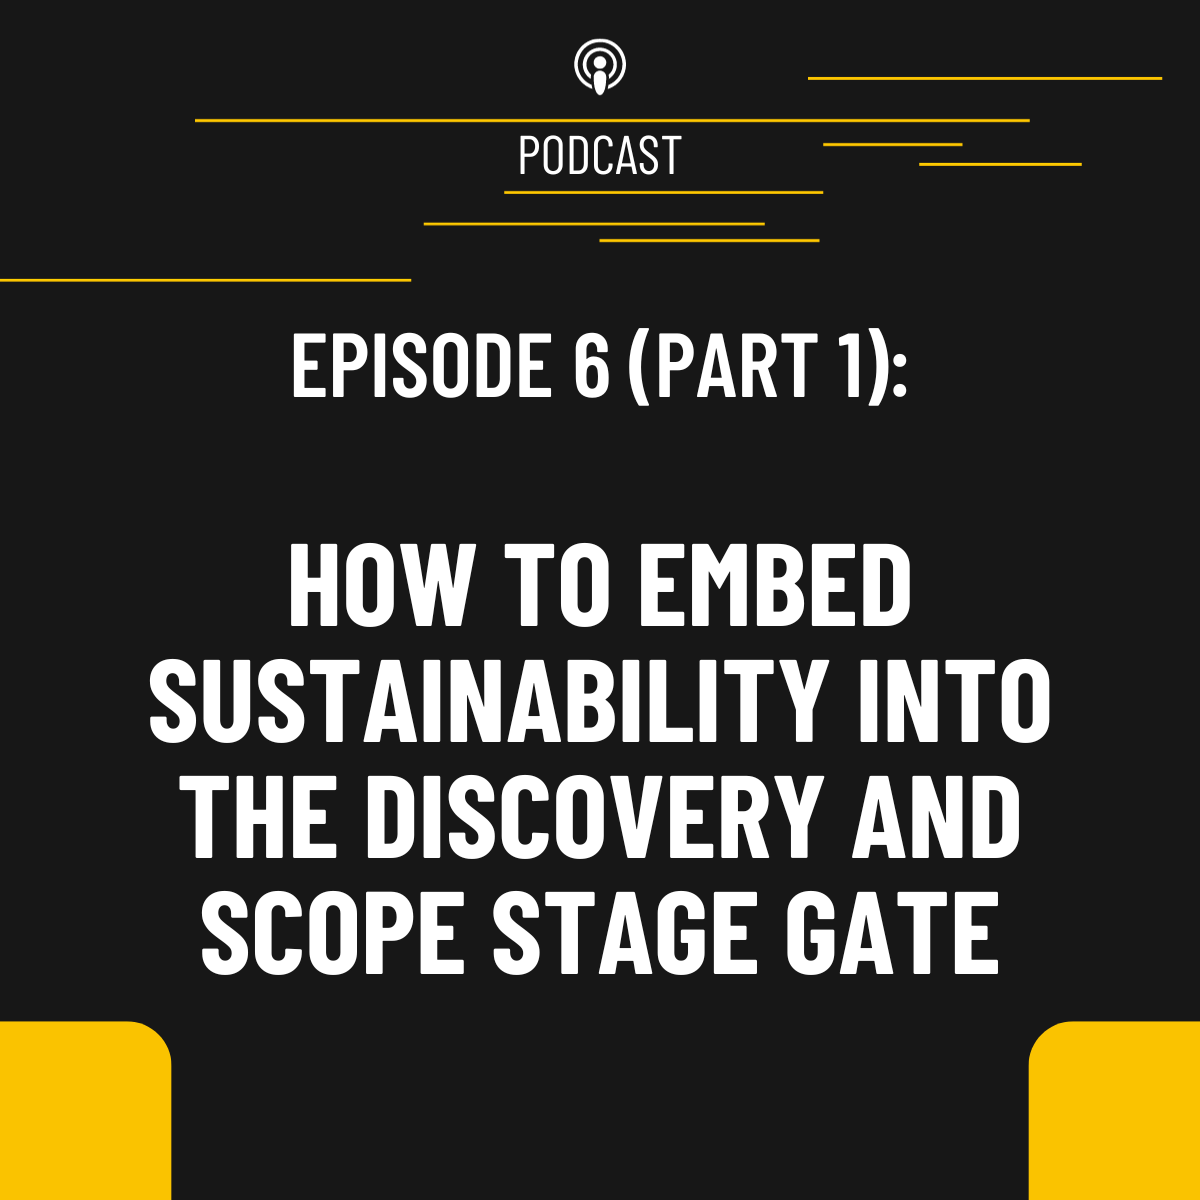 Episode 6, part 1: How to embed sustainability into the discovery and scope stage gate